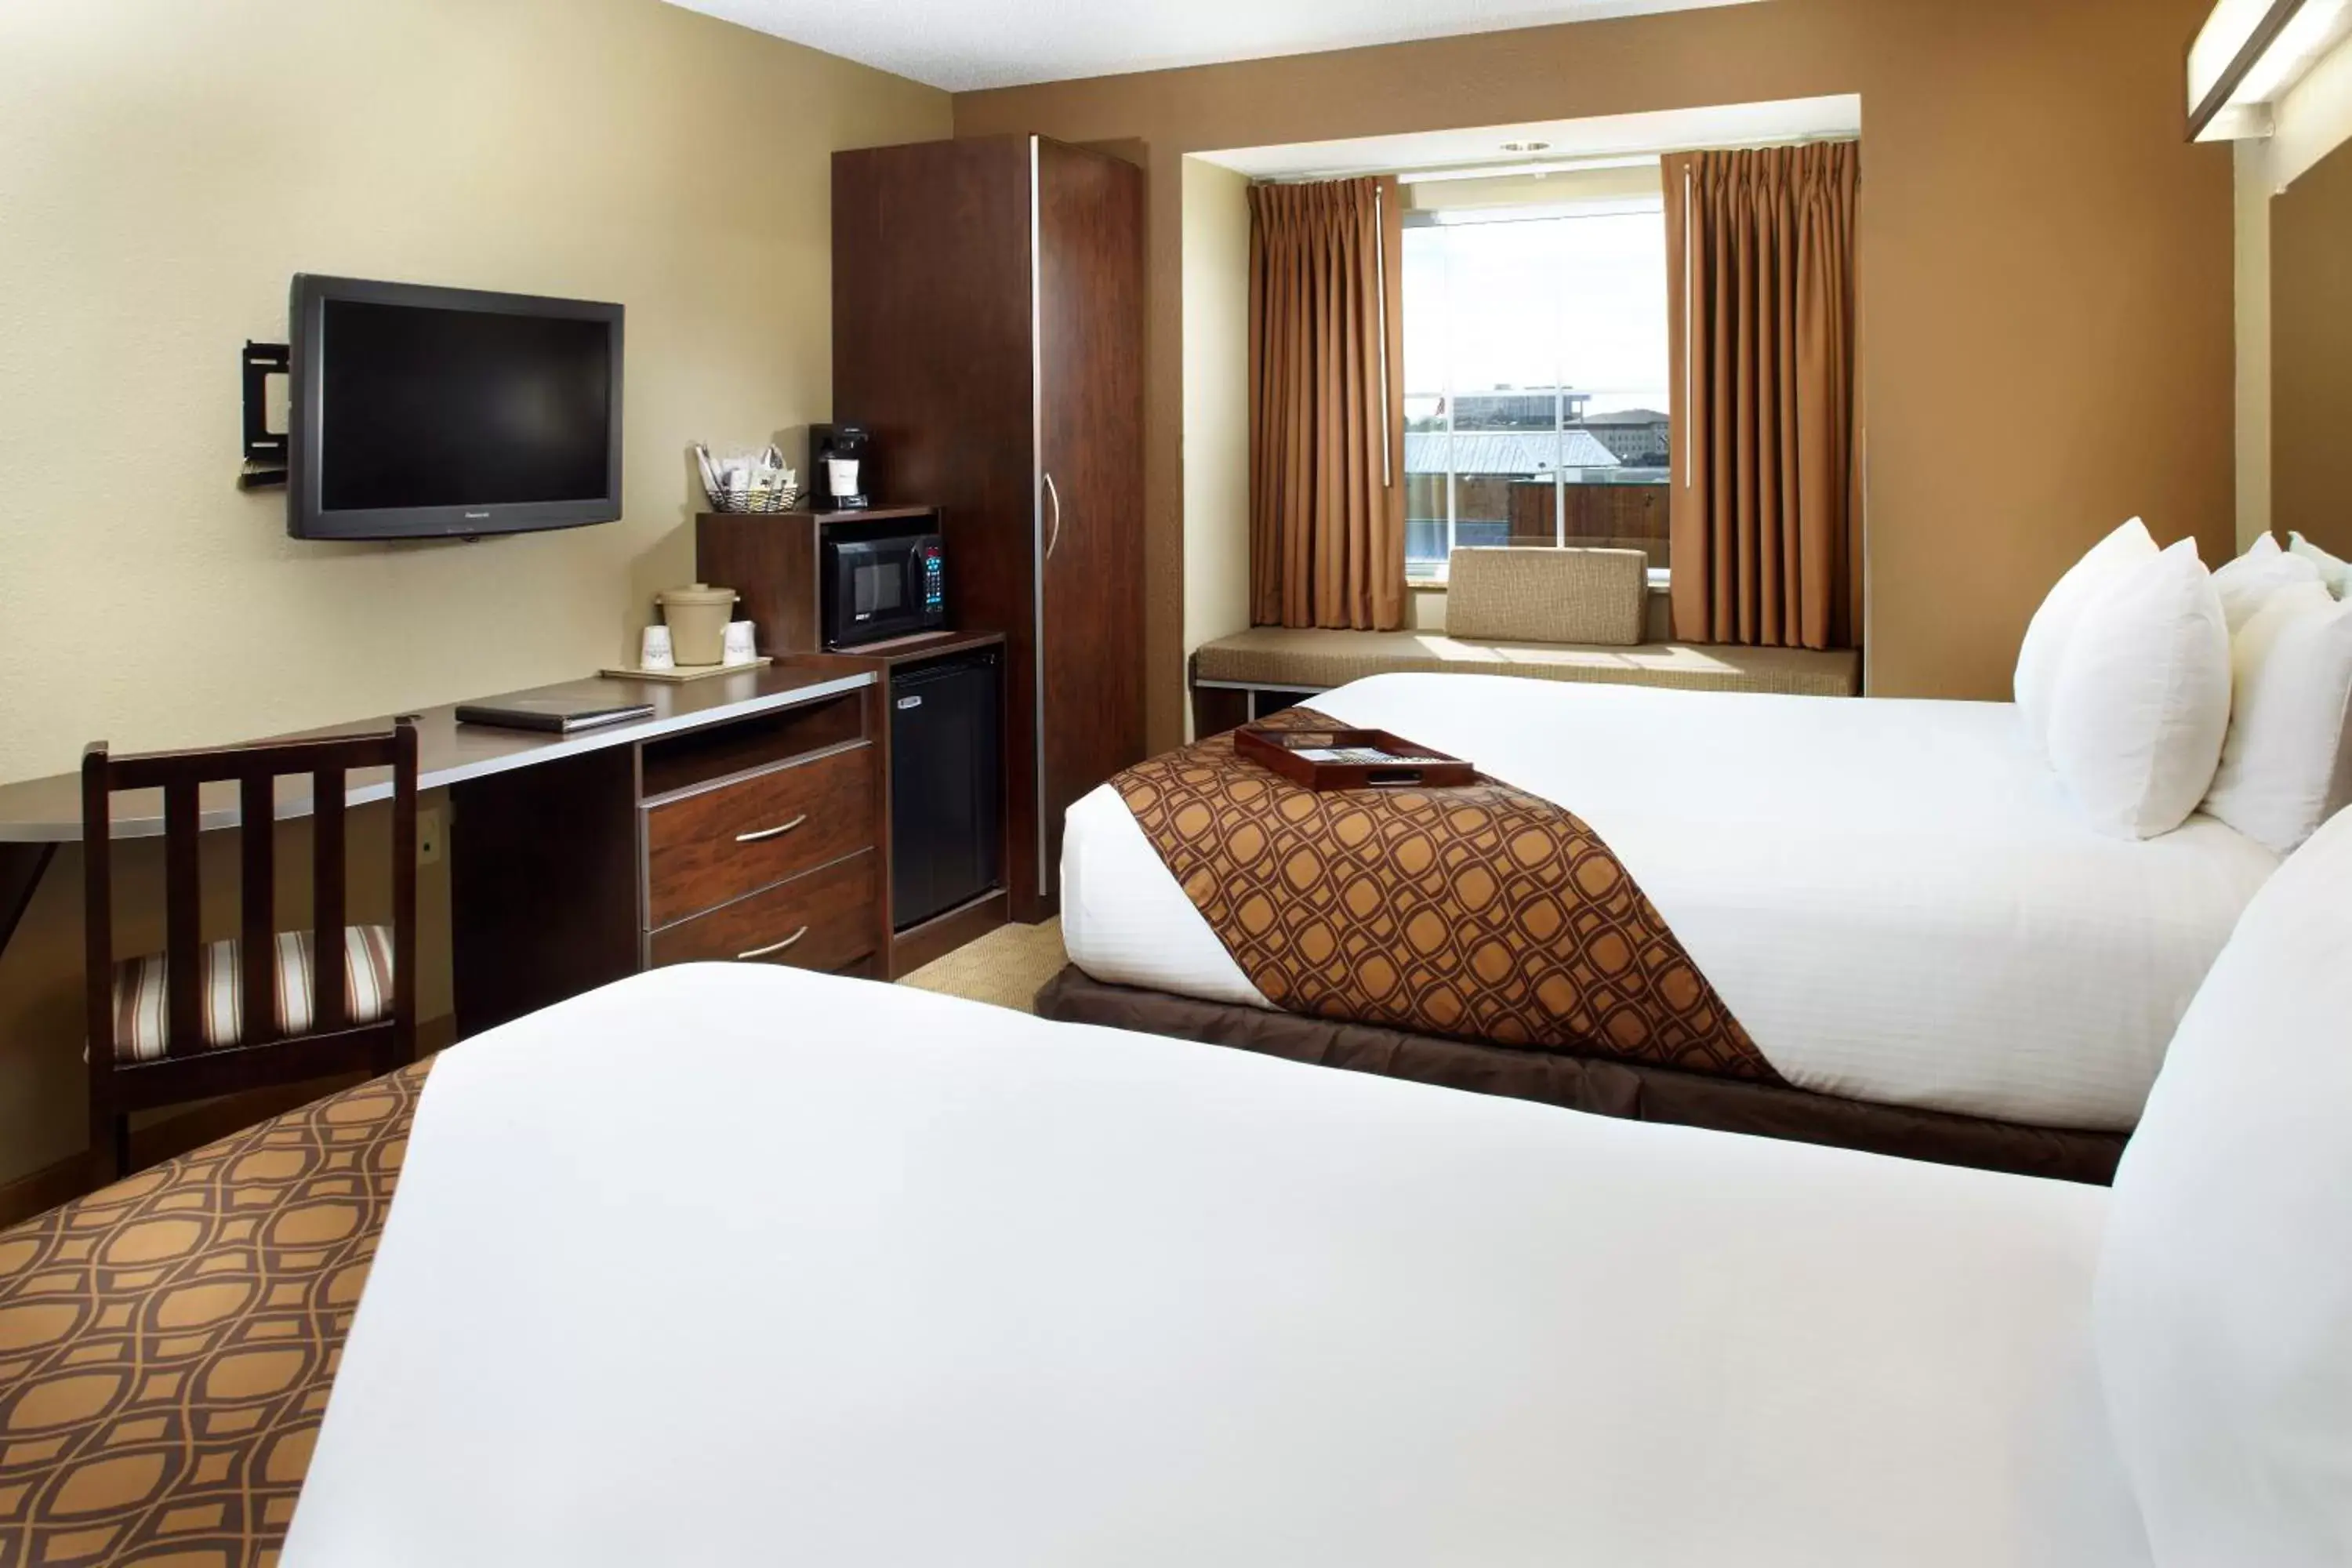 Bedroom, Room Photo in Microtel Inn & Suites by Wyndham Wheeling at The Highlands